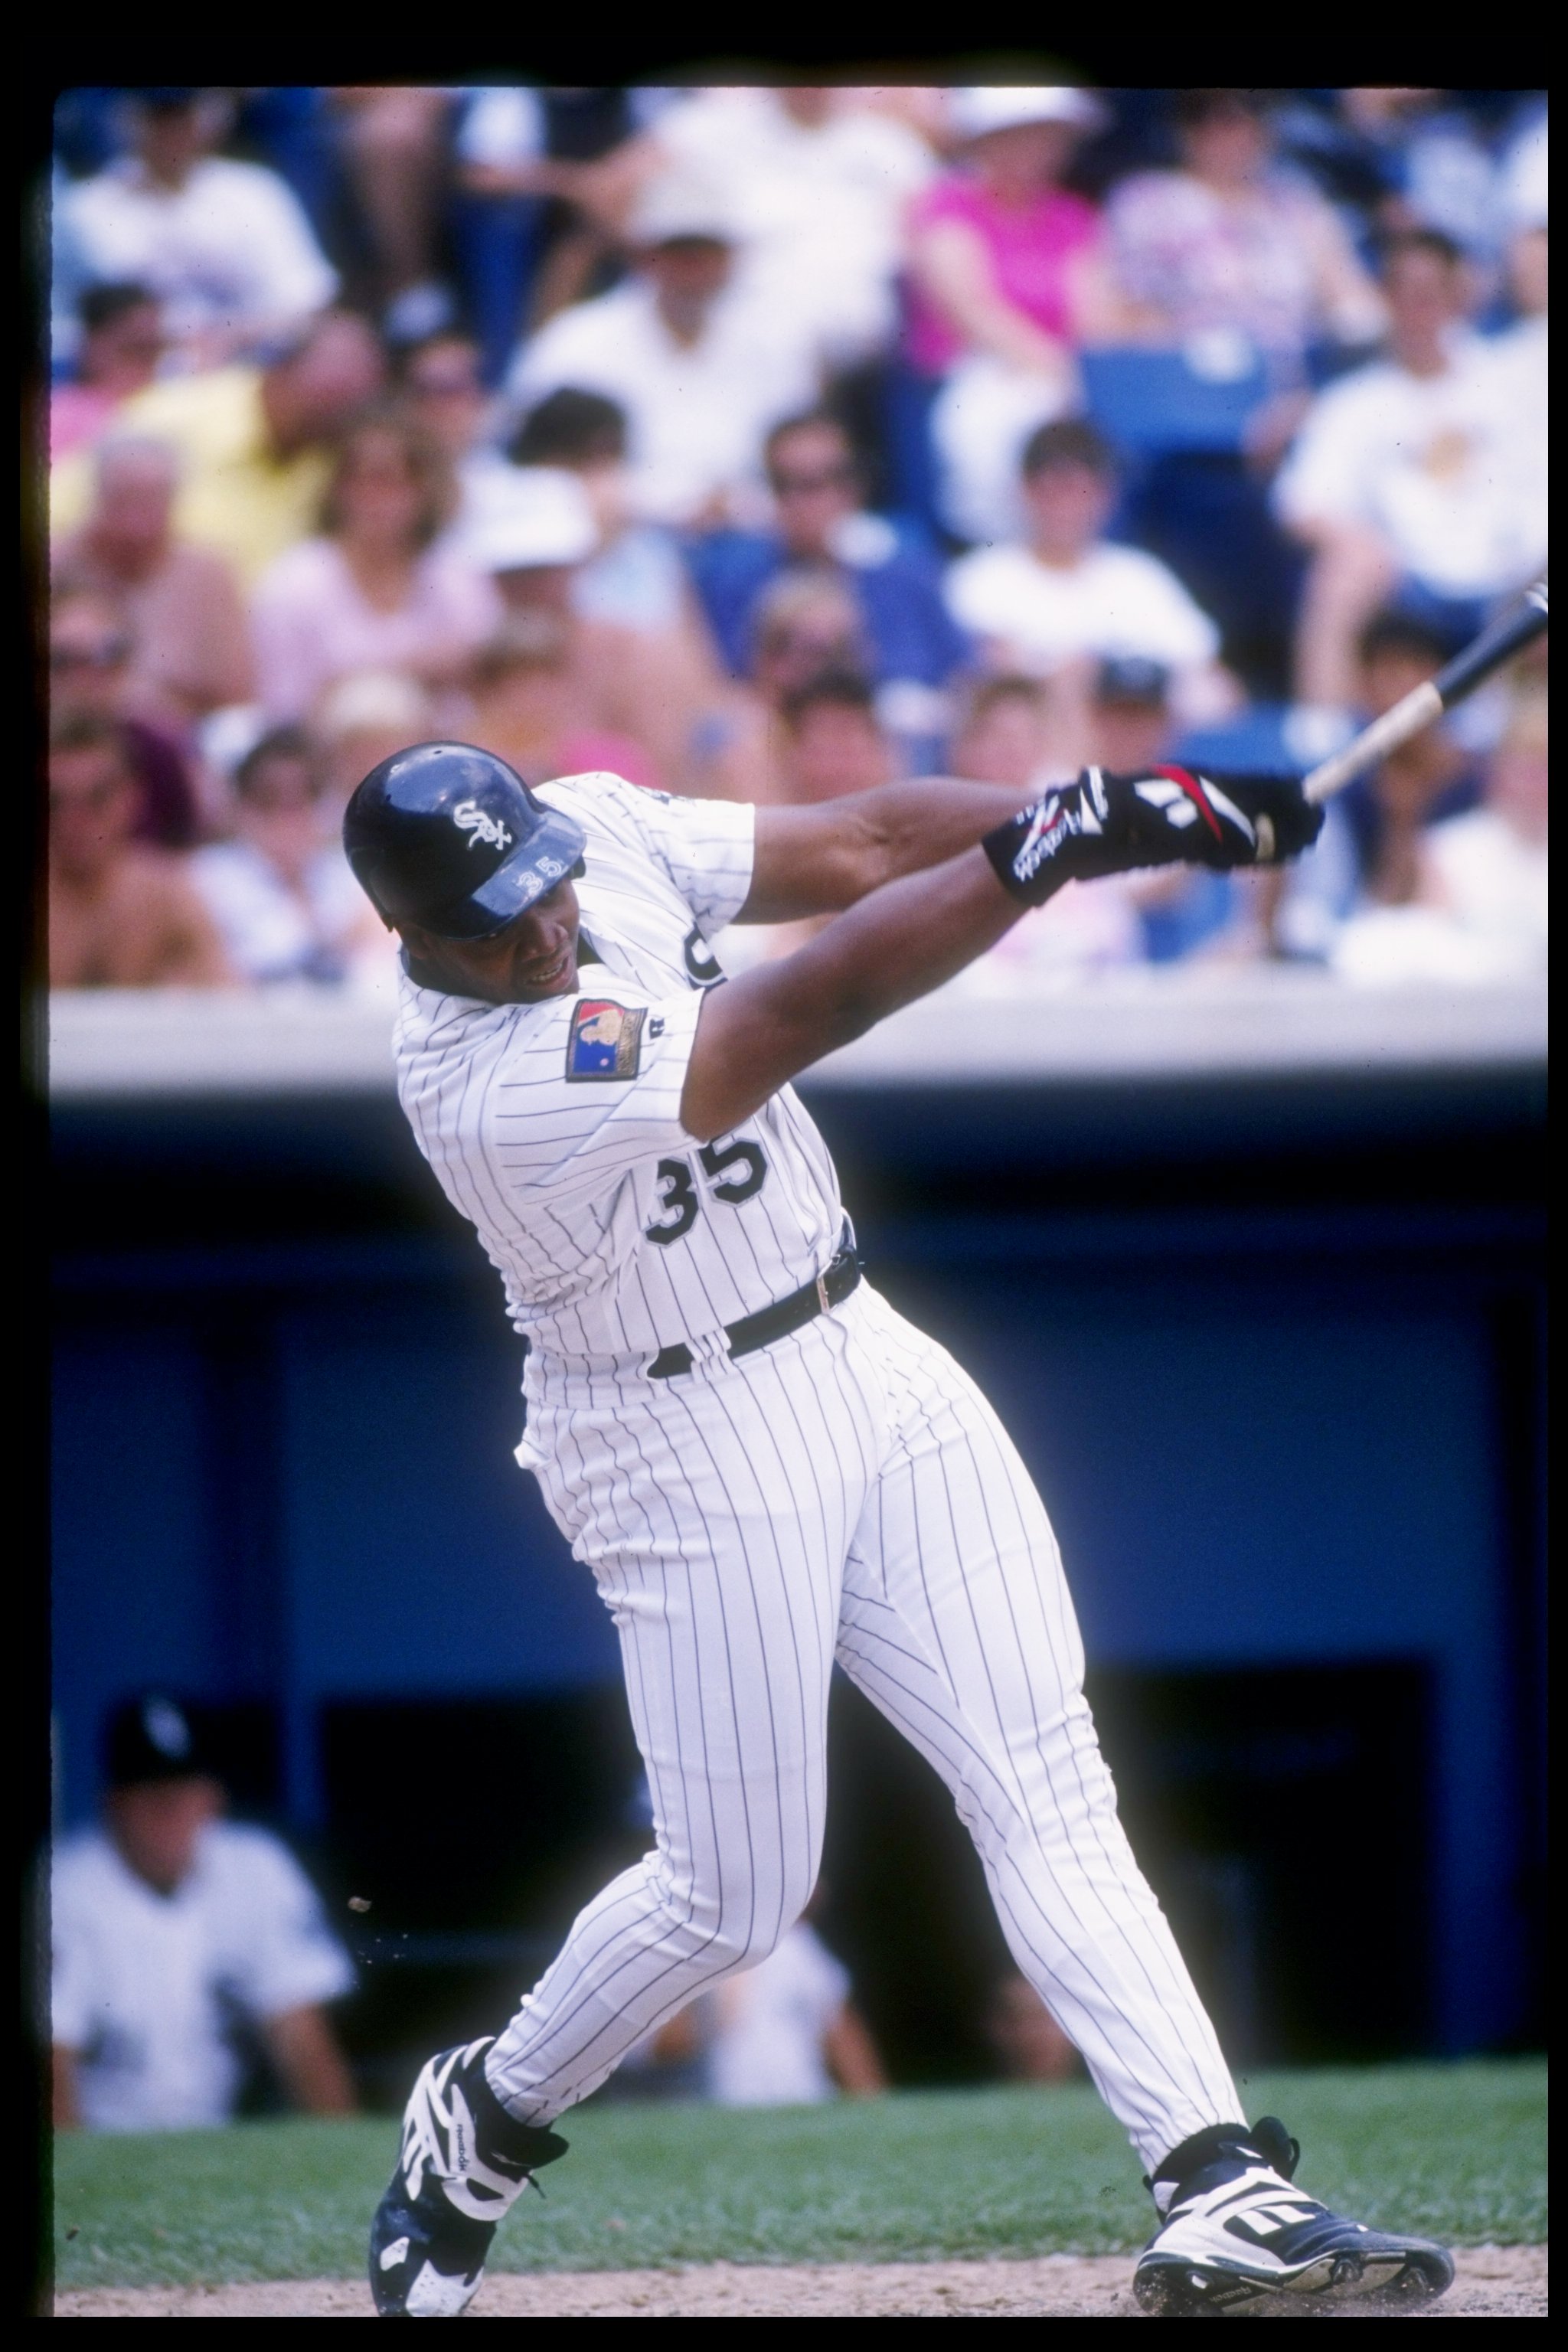 20 Jul 1994: First baseman Frank Thomas of the Chicago White Sox swings at the ball.